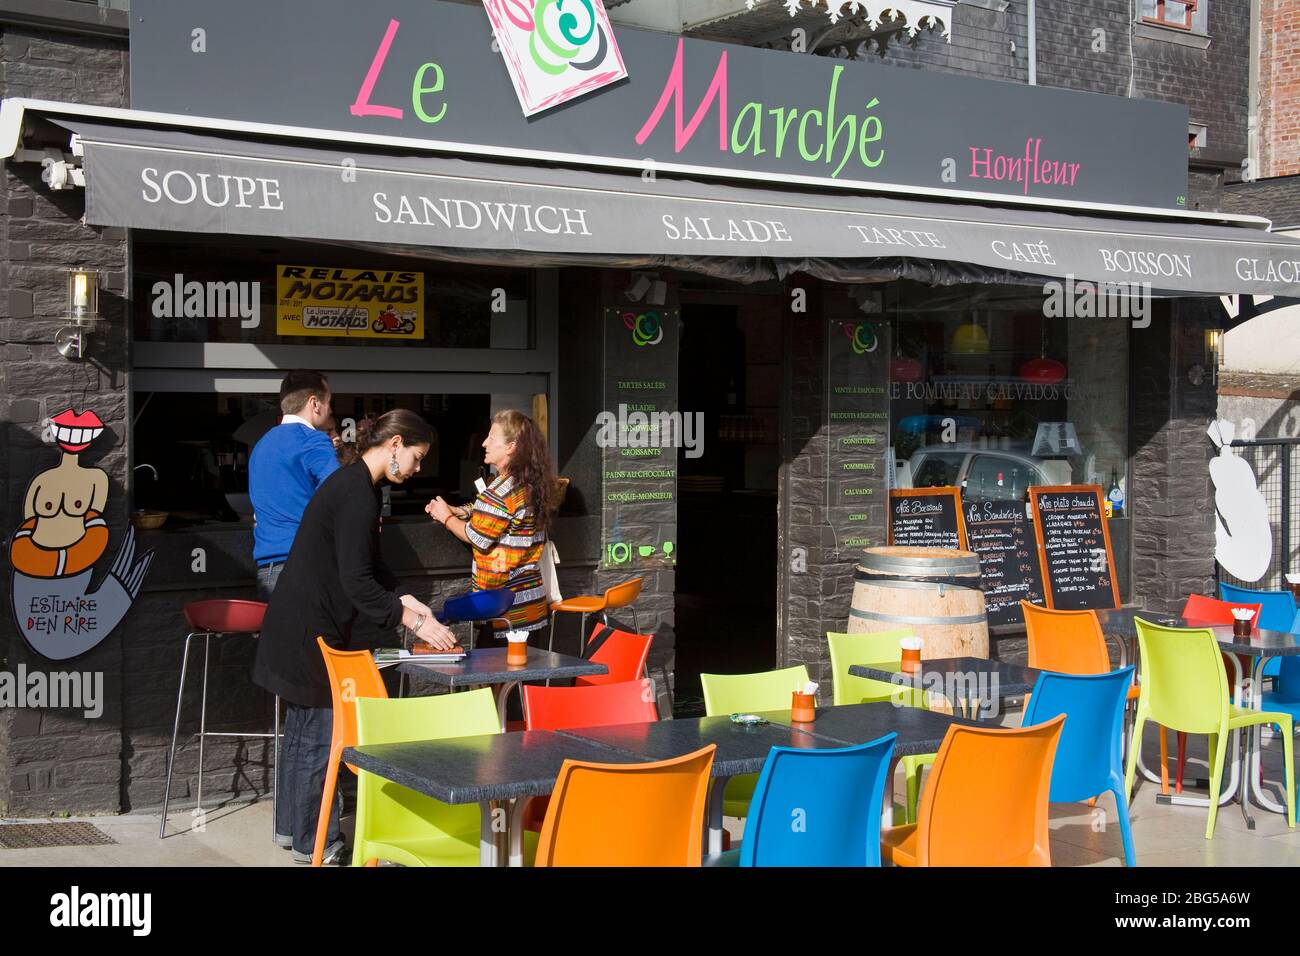 Le Marche Restaurant in Honfleur,Normandy,France,Europe Stock Photo